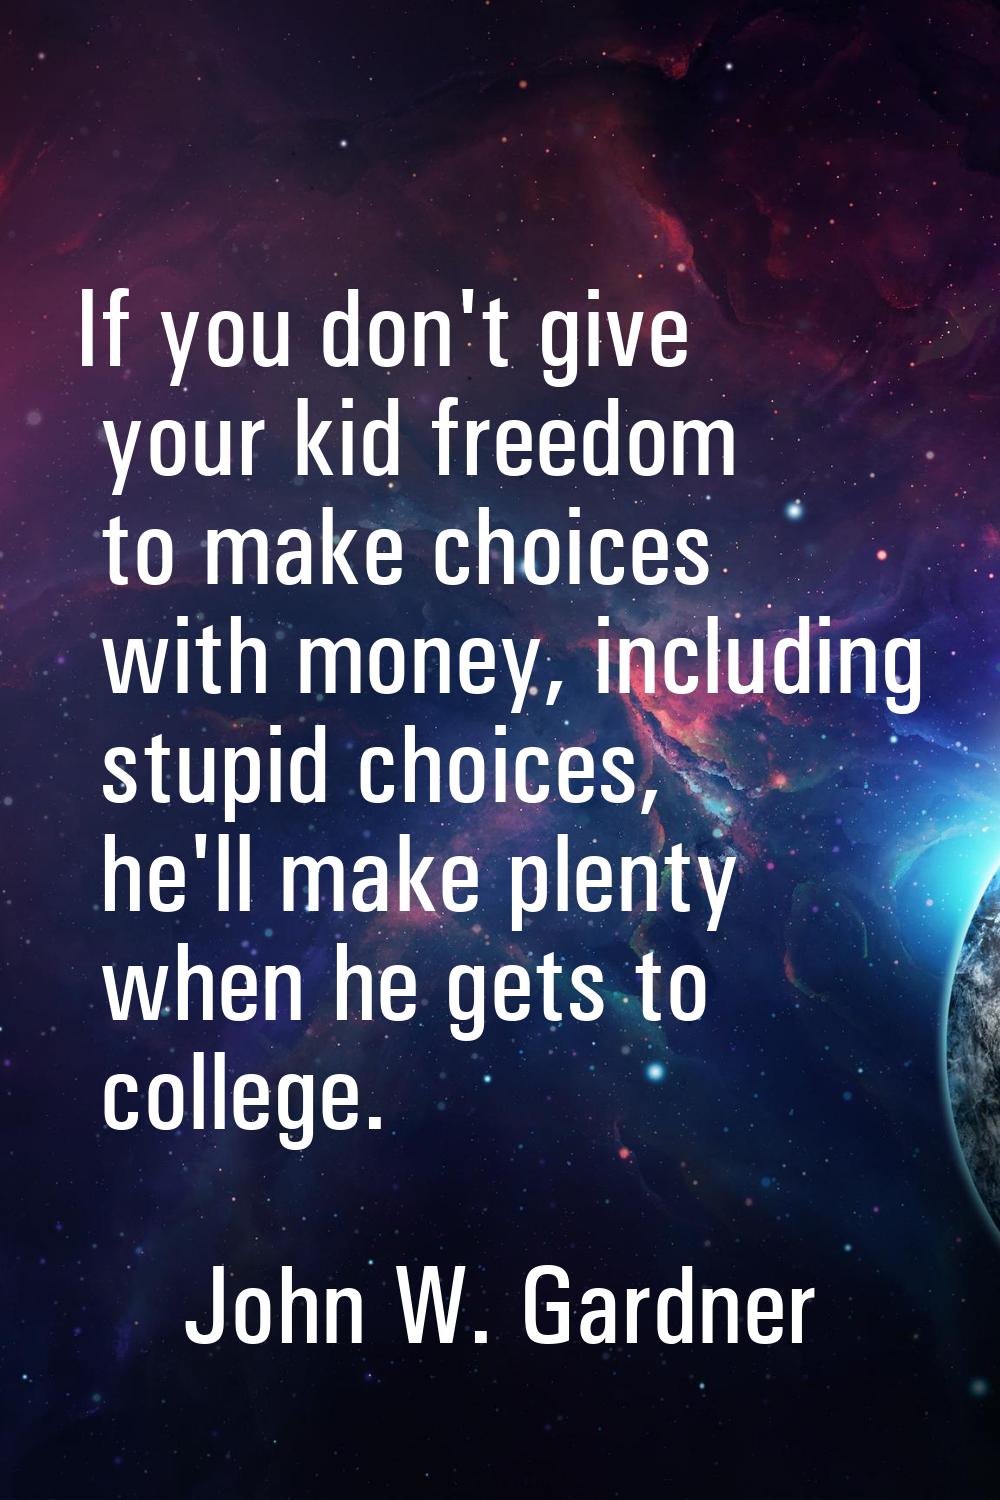 If you don't give your kid freedom to make choices with money, including stupid choices, he'll make